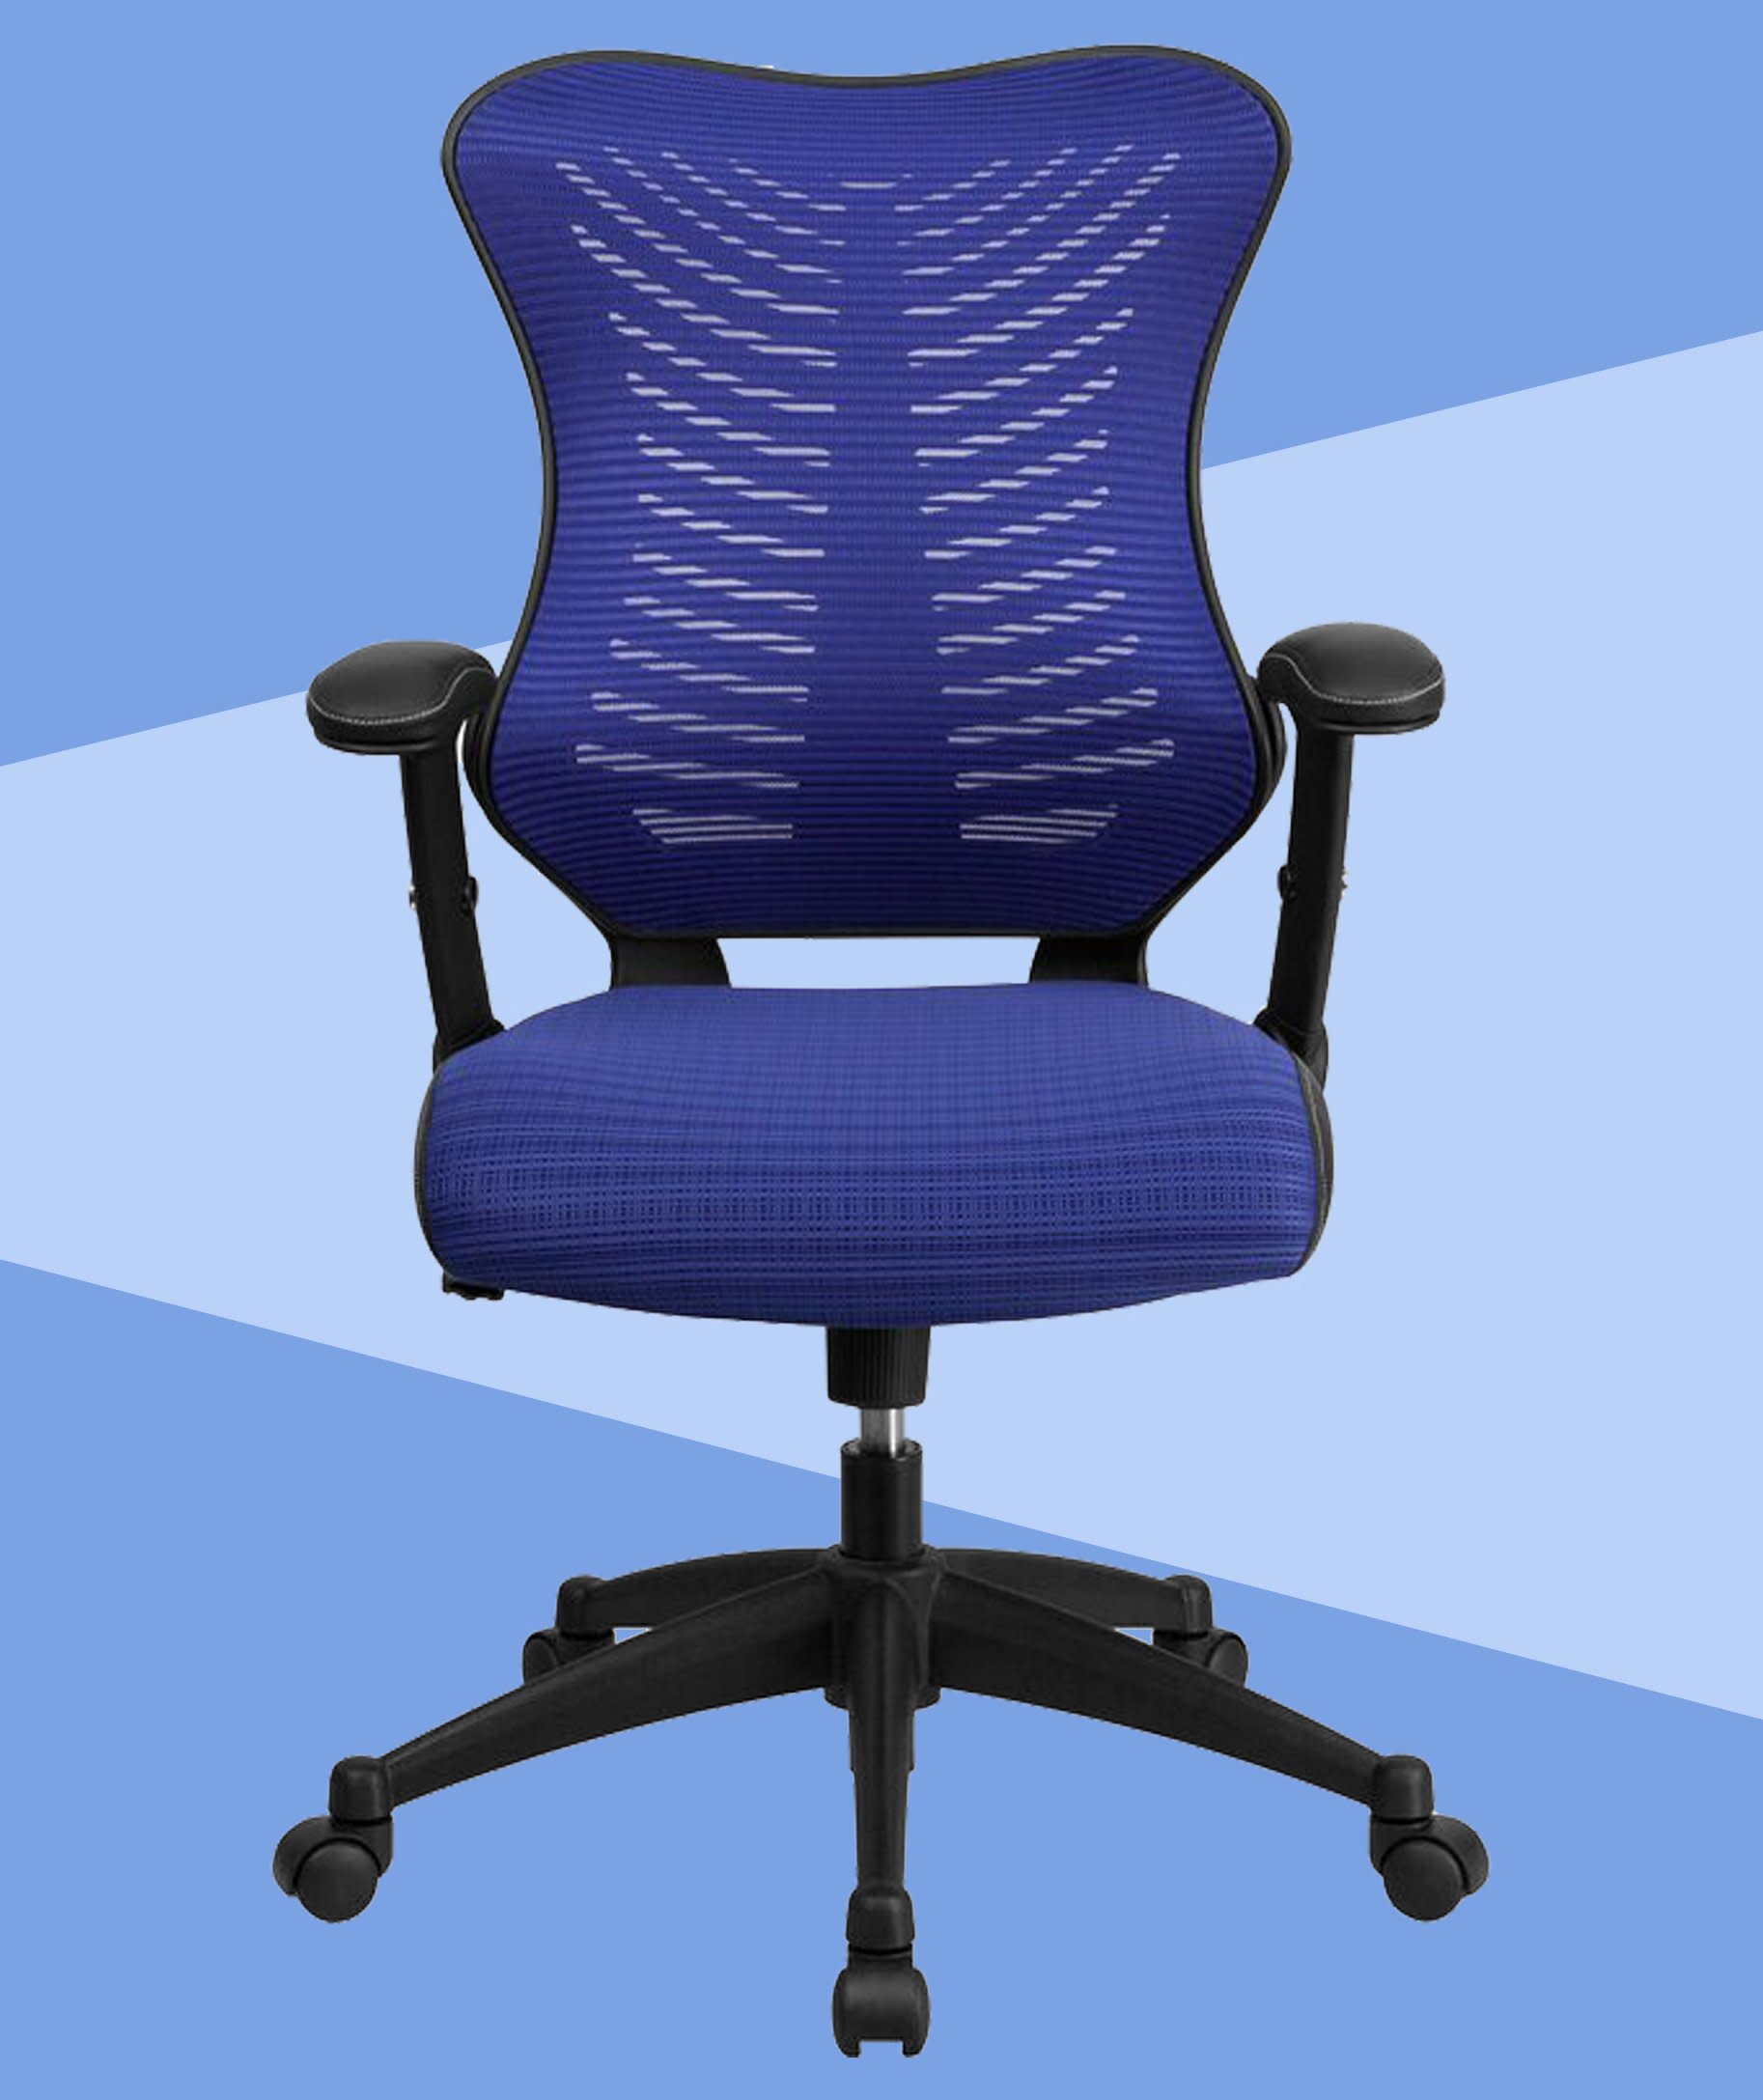 Most Comfortable Office Chair - Chair Design